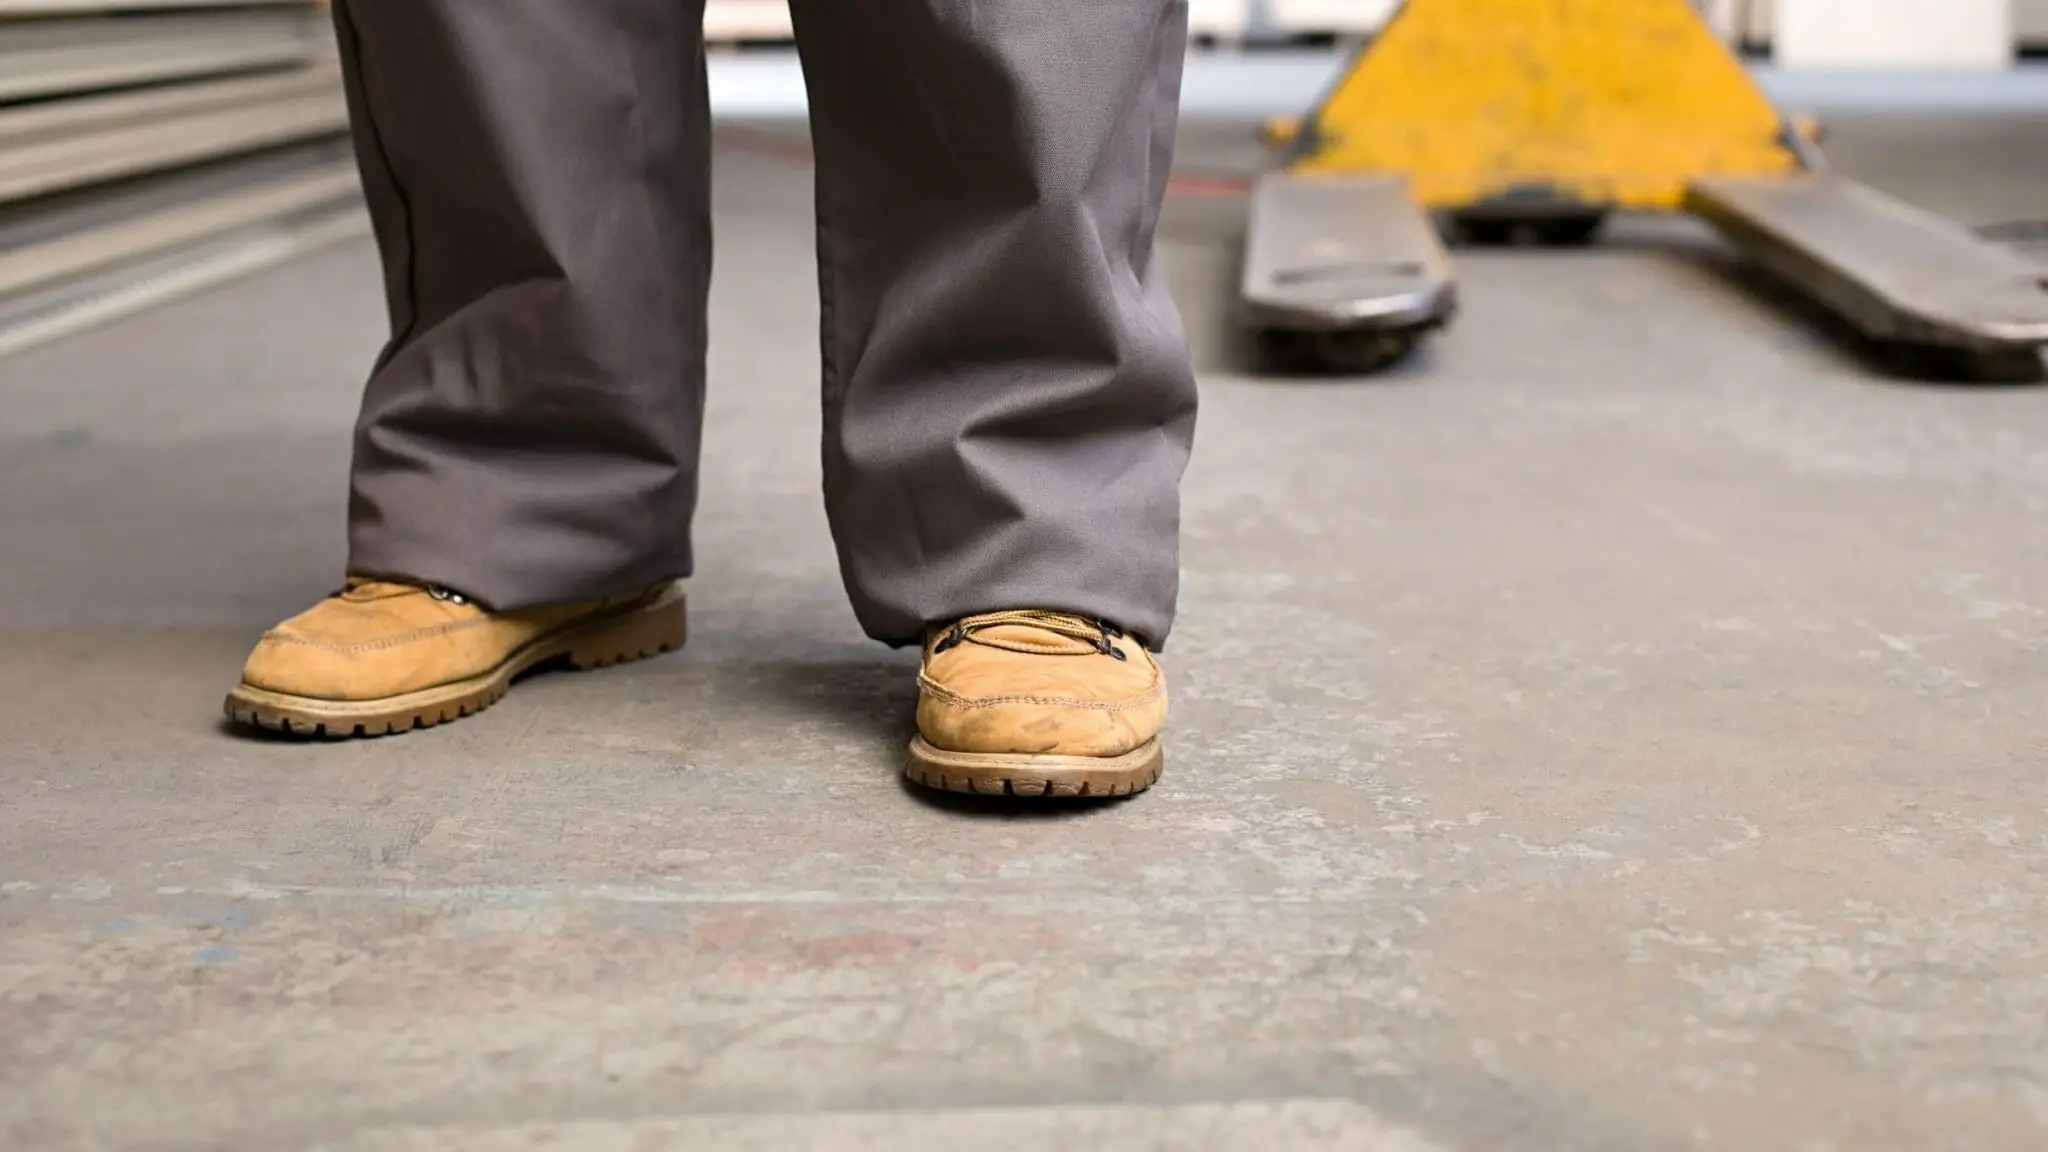 Warehouse Shoes – Best for Walking on Concrete All Day